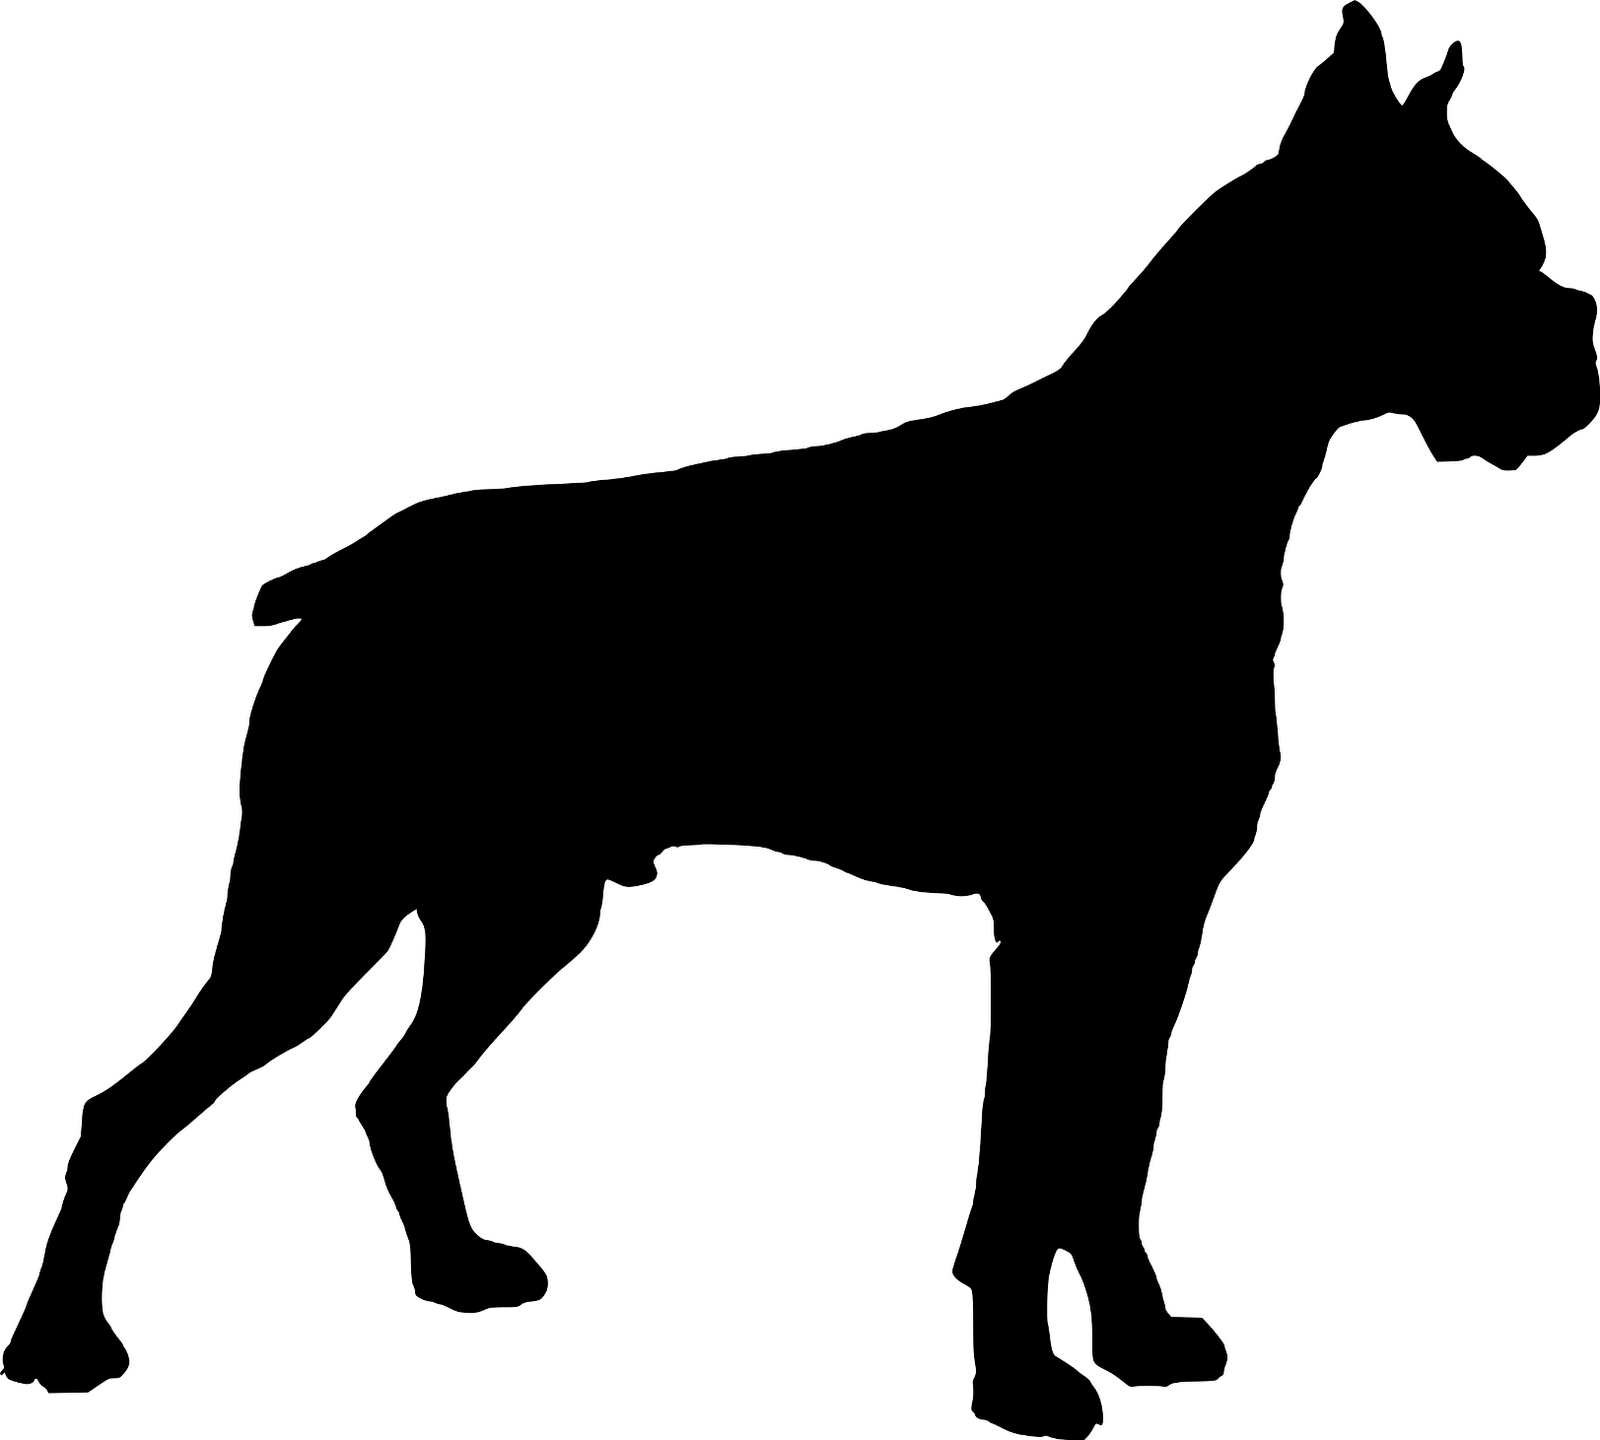 Dog Silhouette Images Cliparts.co